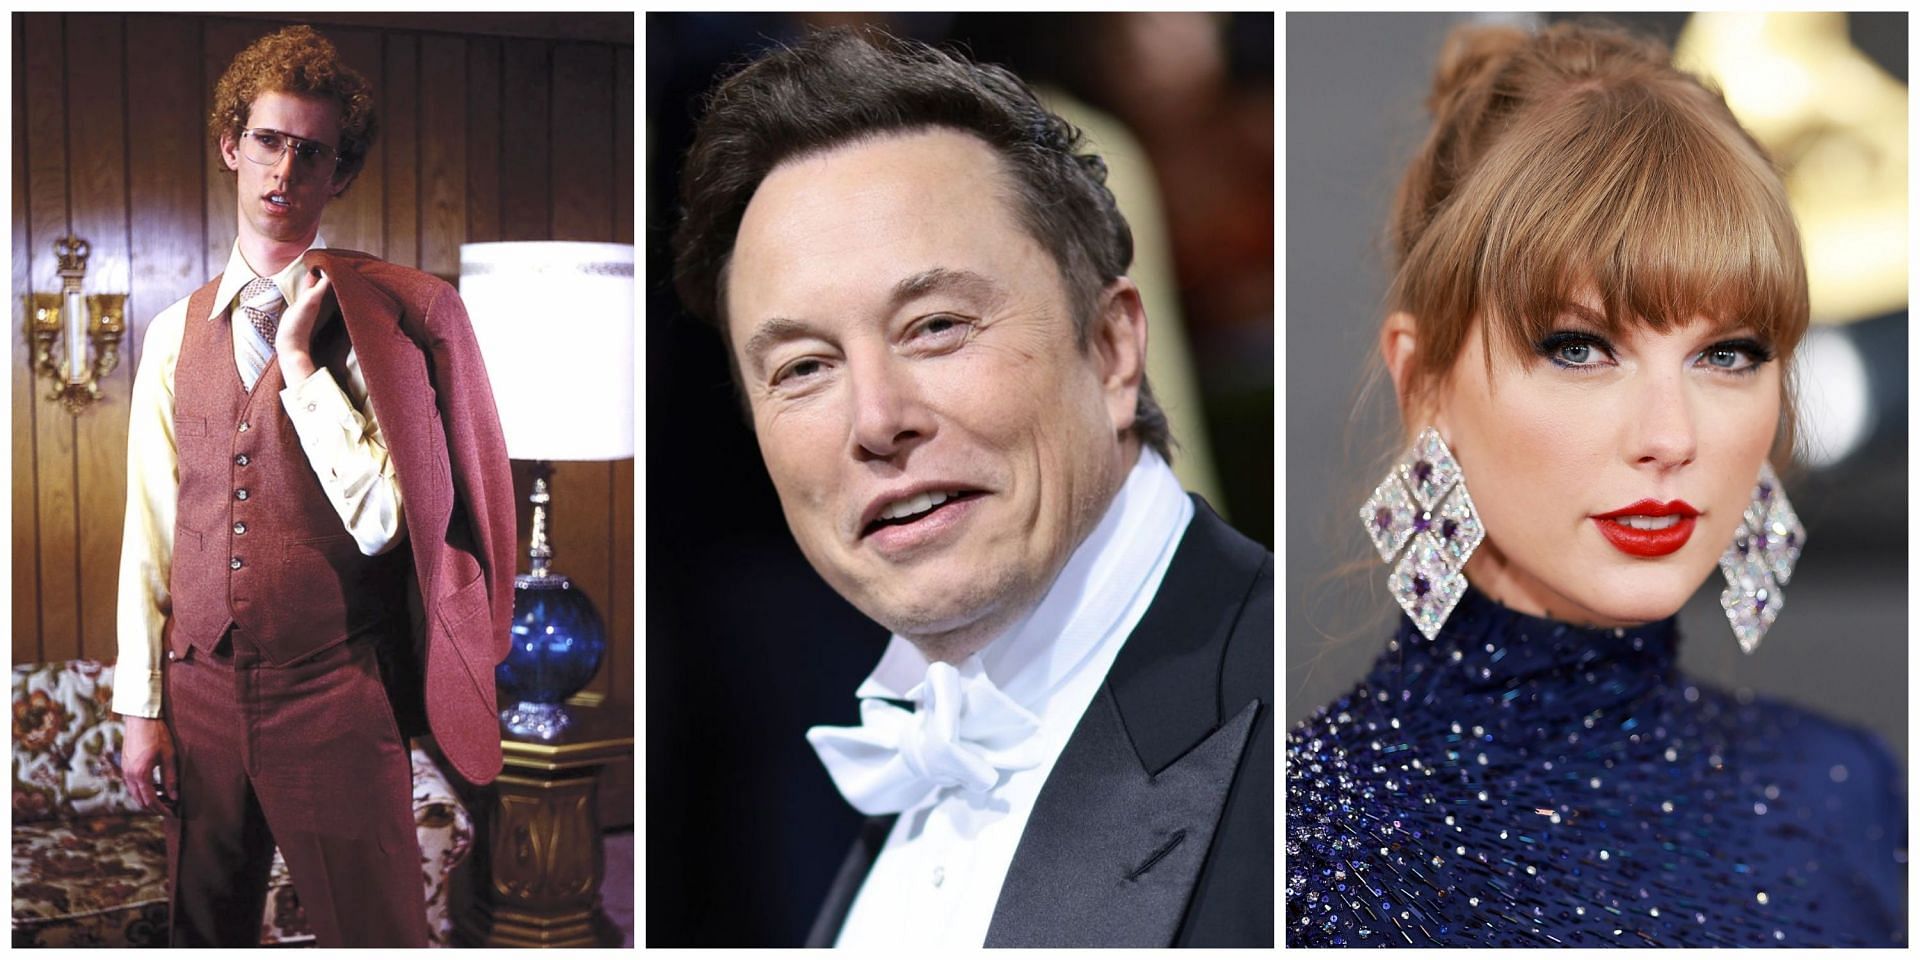 Elon Musk tweets about Taylor Swift resembling Napolean Dynamite, sparks controversy (Image via Getty Images)